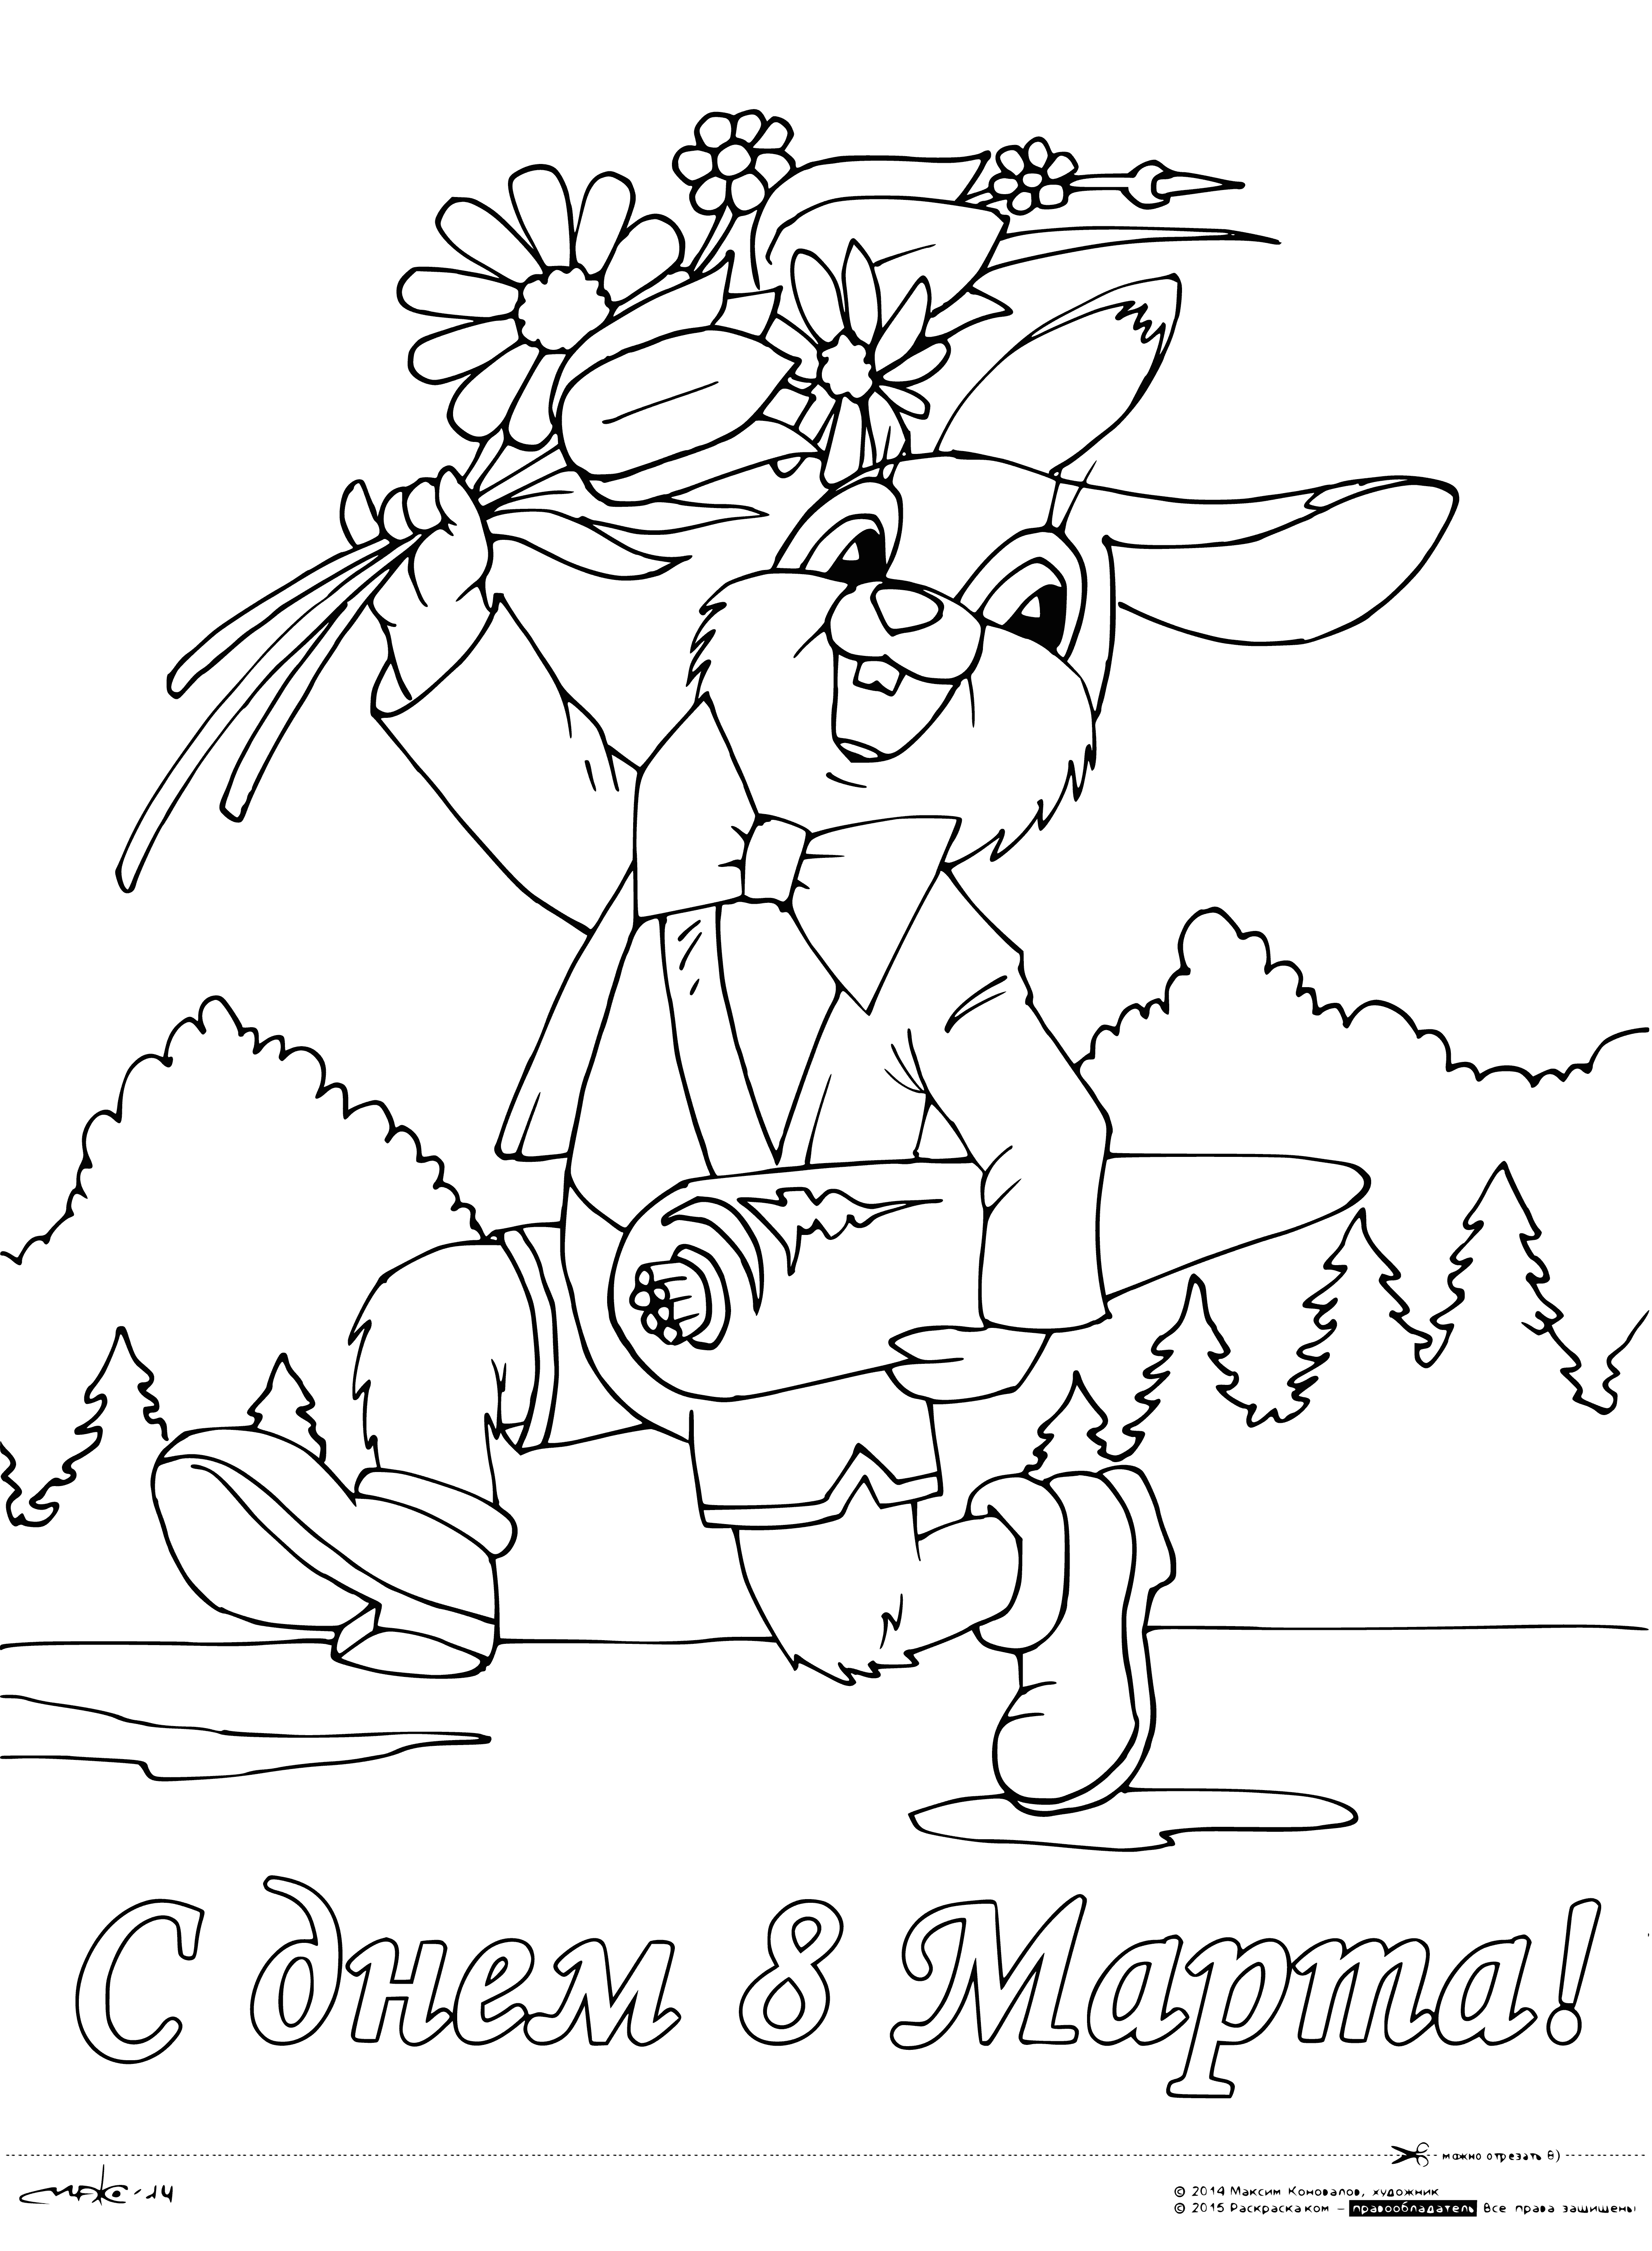 Happy March 8! coloring page